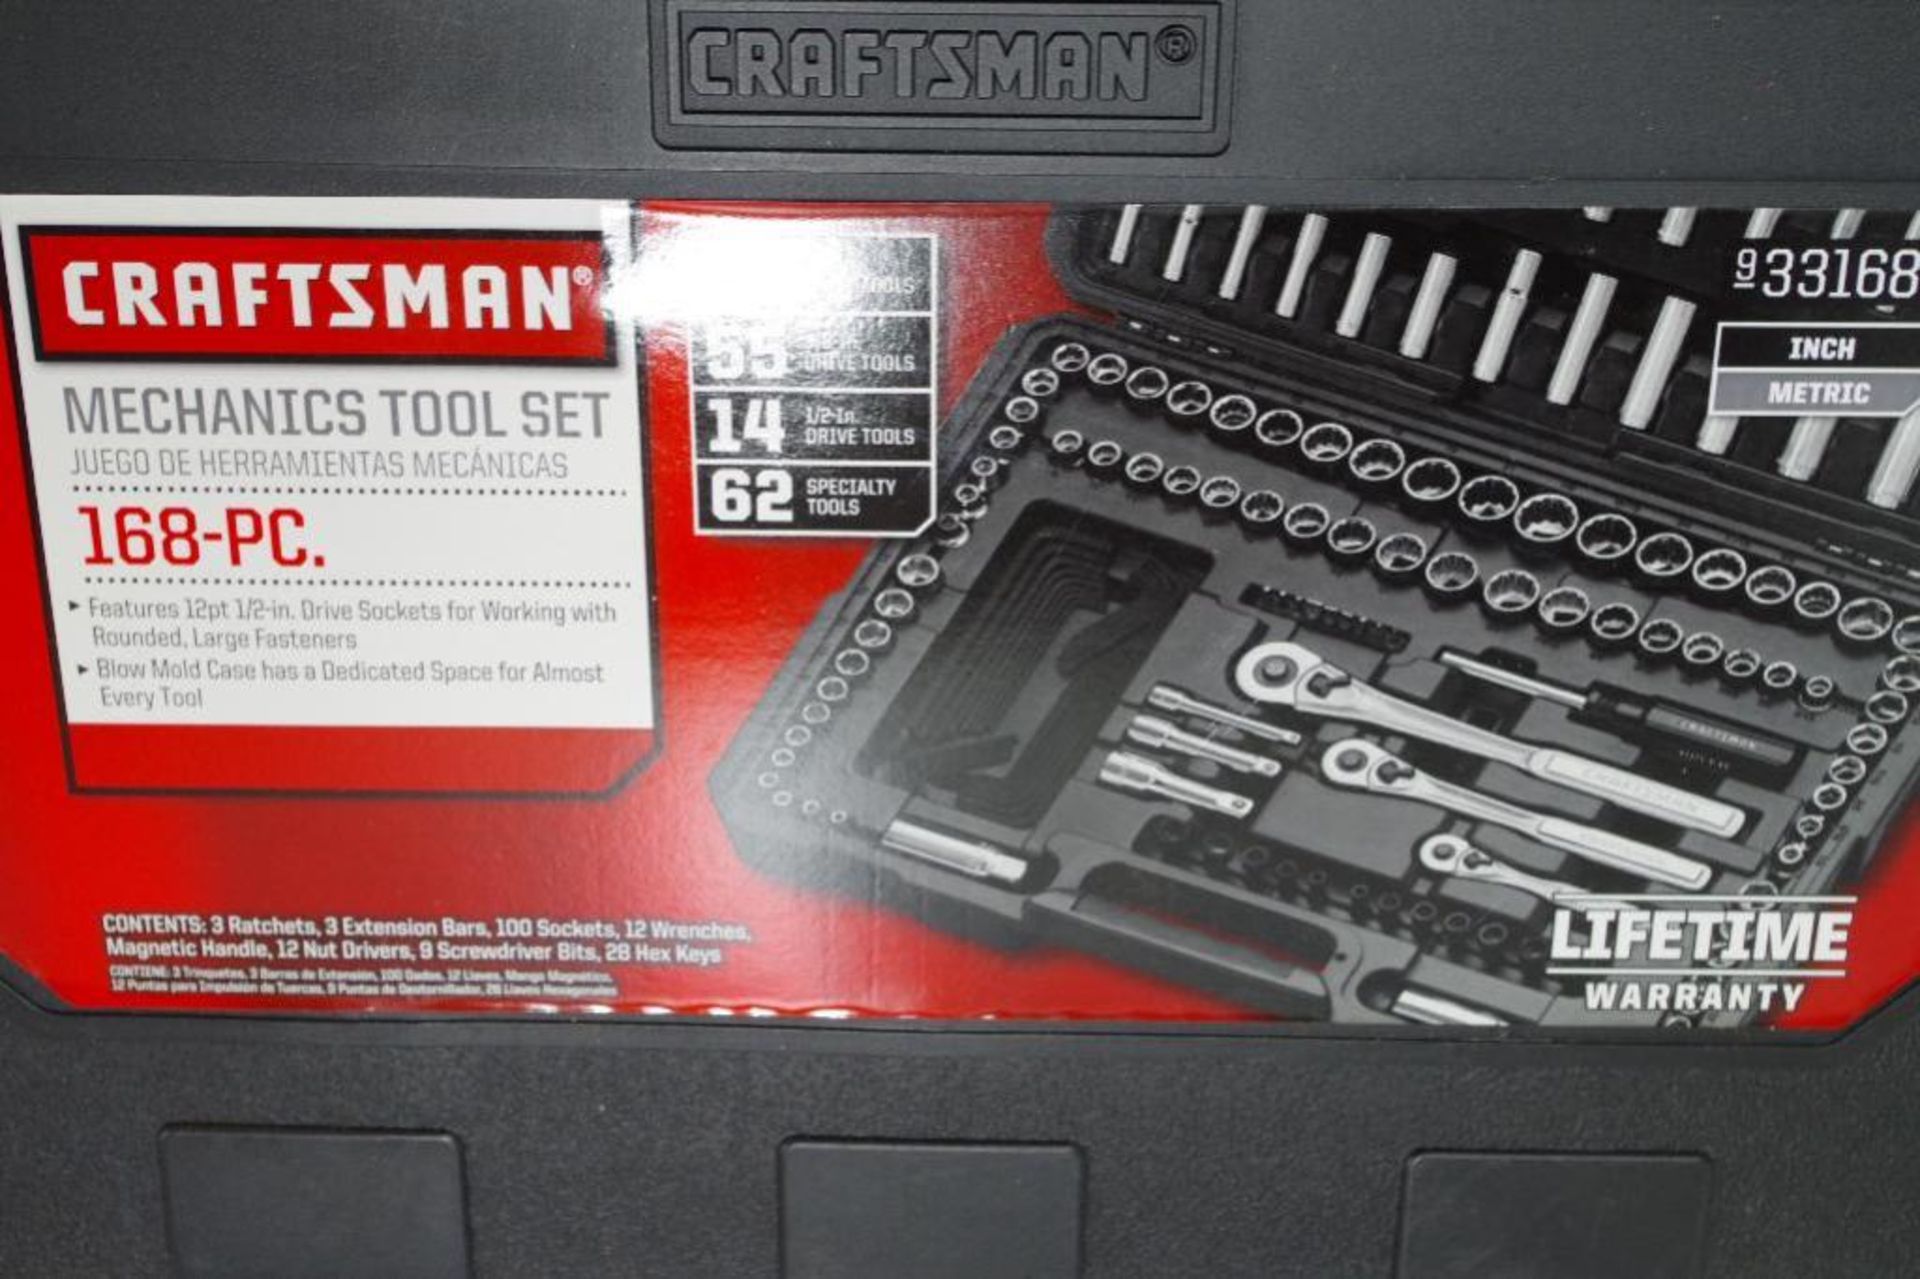 CRAFTSMAN 168-Piece Mechanics Tool Set (appears complete but heavily rusted) - Image 2 of 4